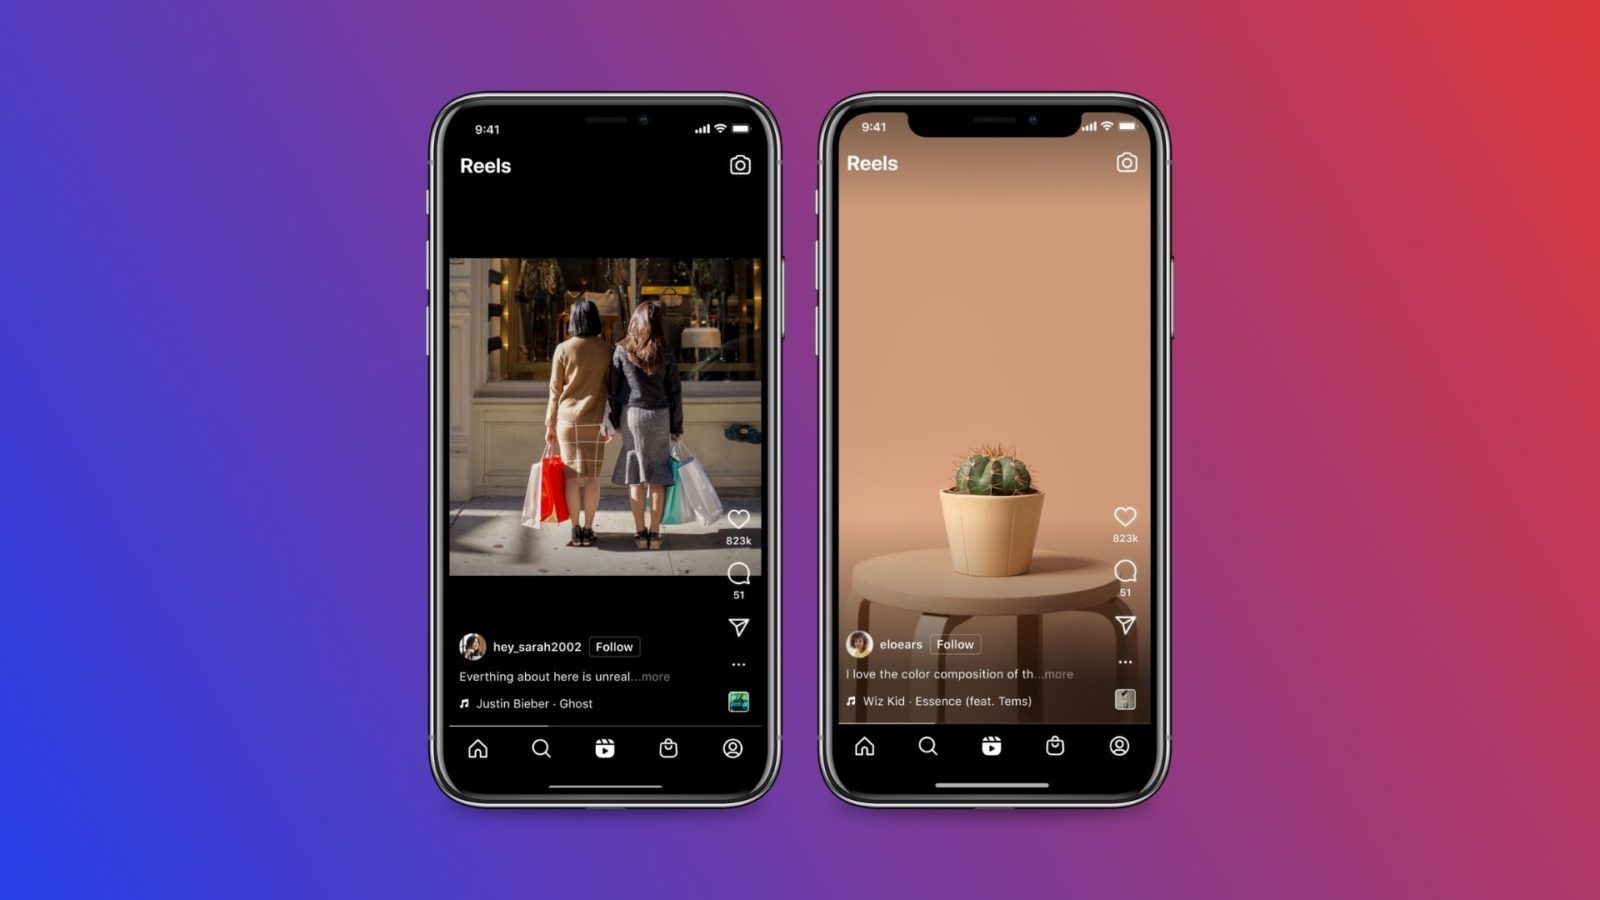 Instagram Is Now Putting Ads In Your Profile Feed